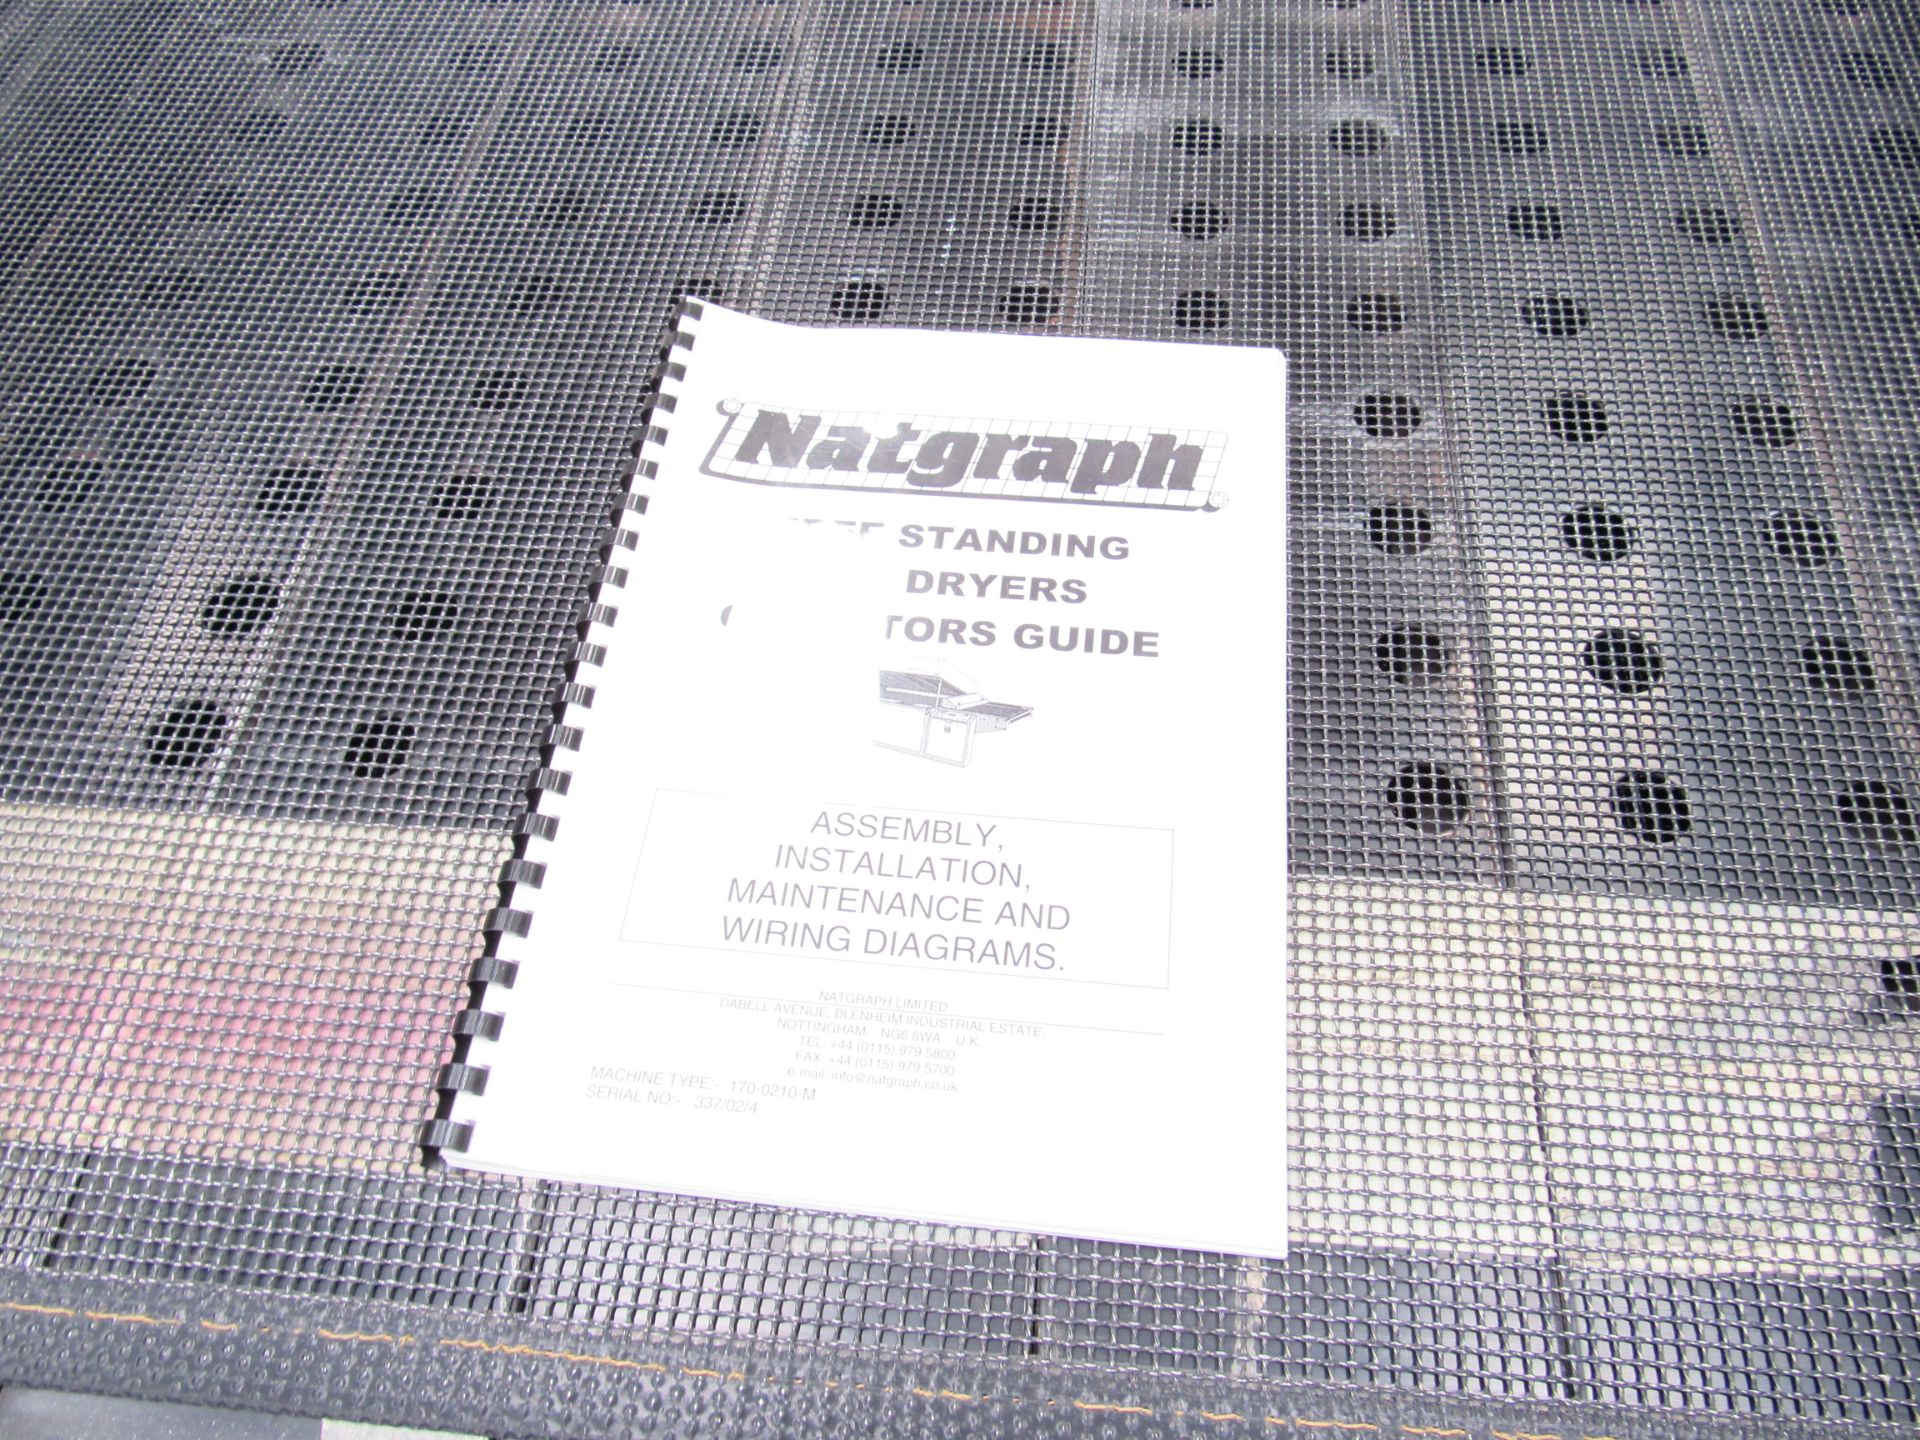 Serfast Screen Printer with Natgraph 170-02.01 UV Dryer, Serial Number 337-02-04, 2002 - Image 10 of 13